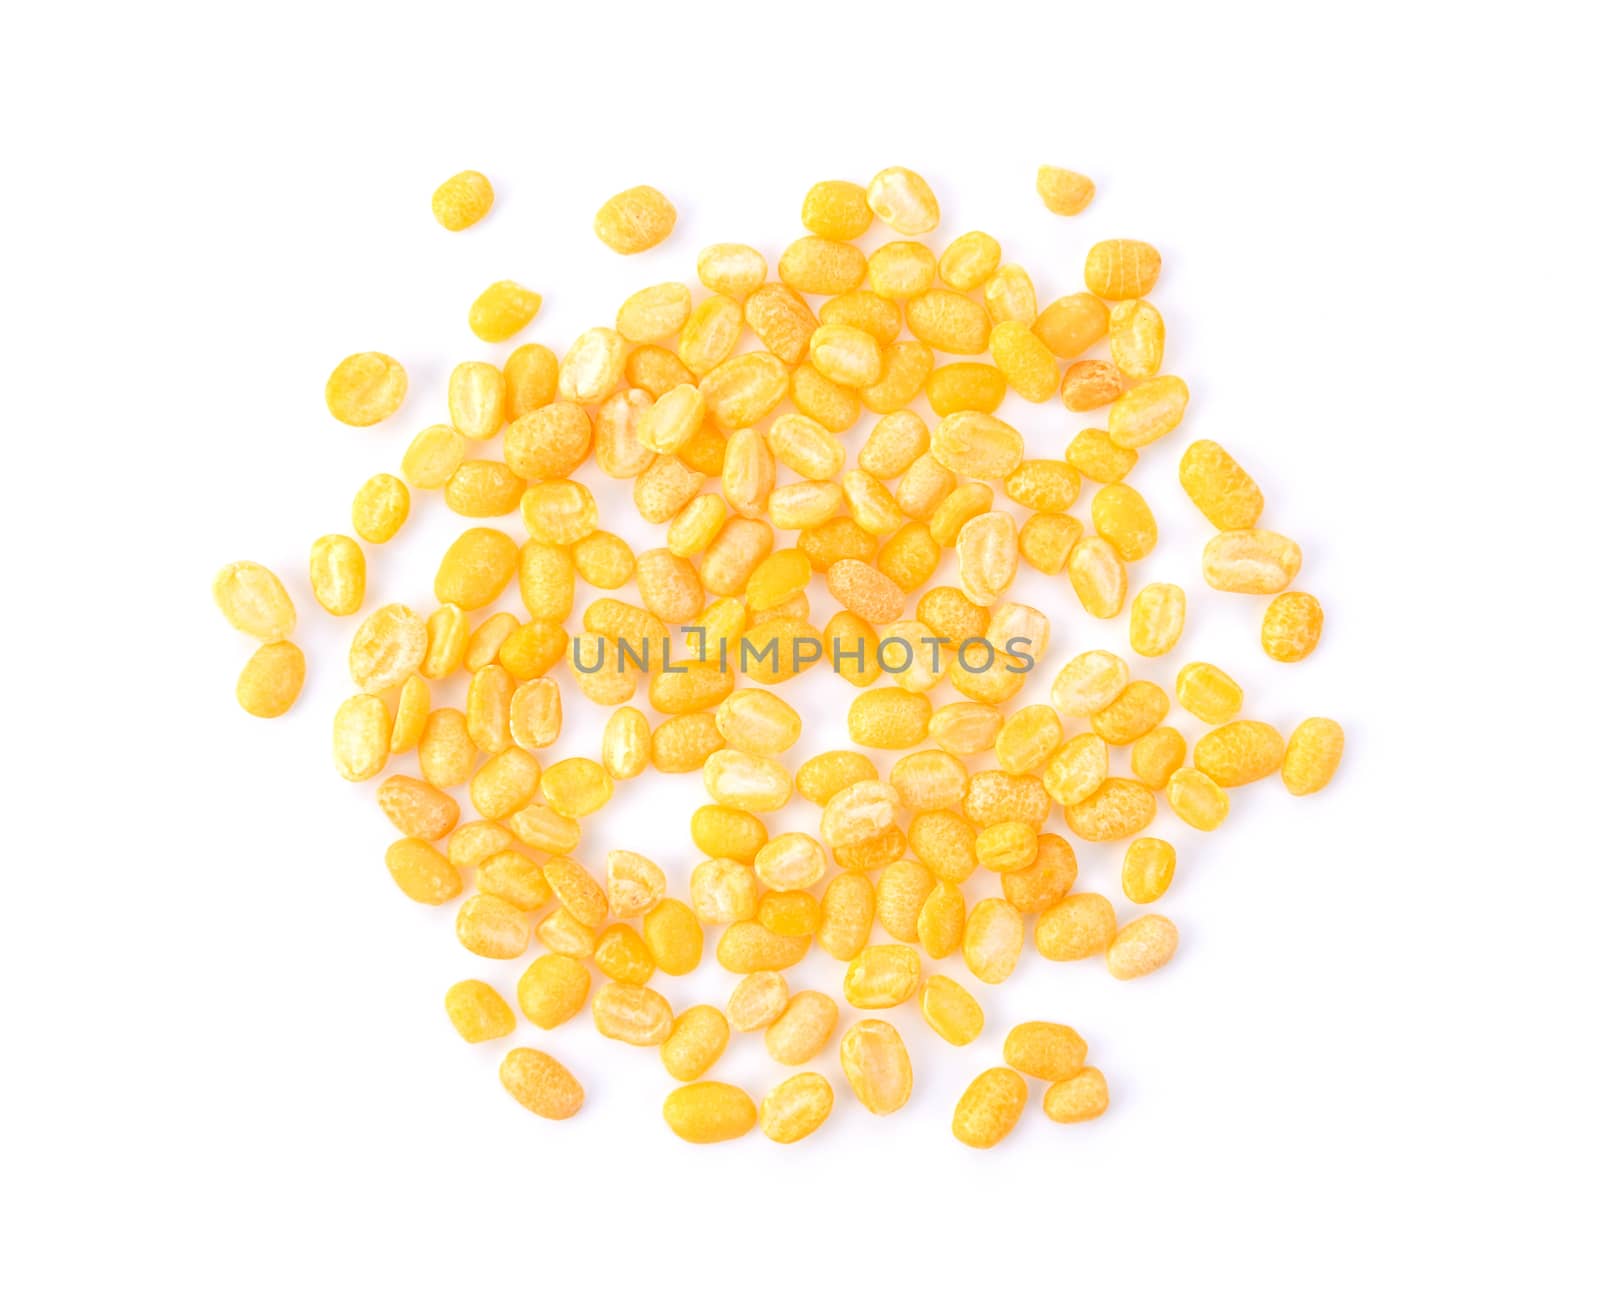 Green beans seeds on white background. top view